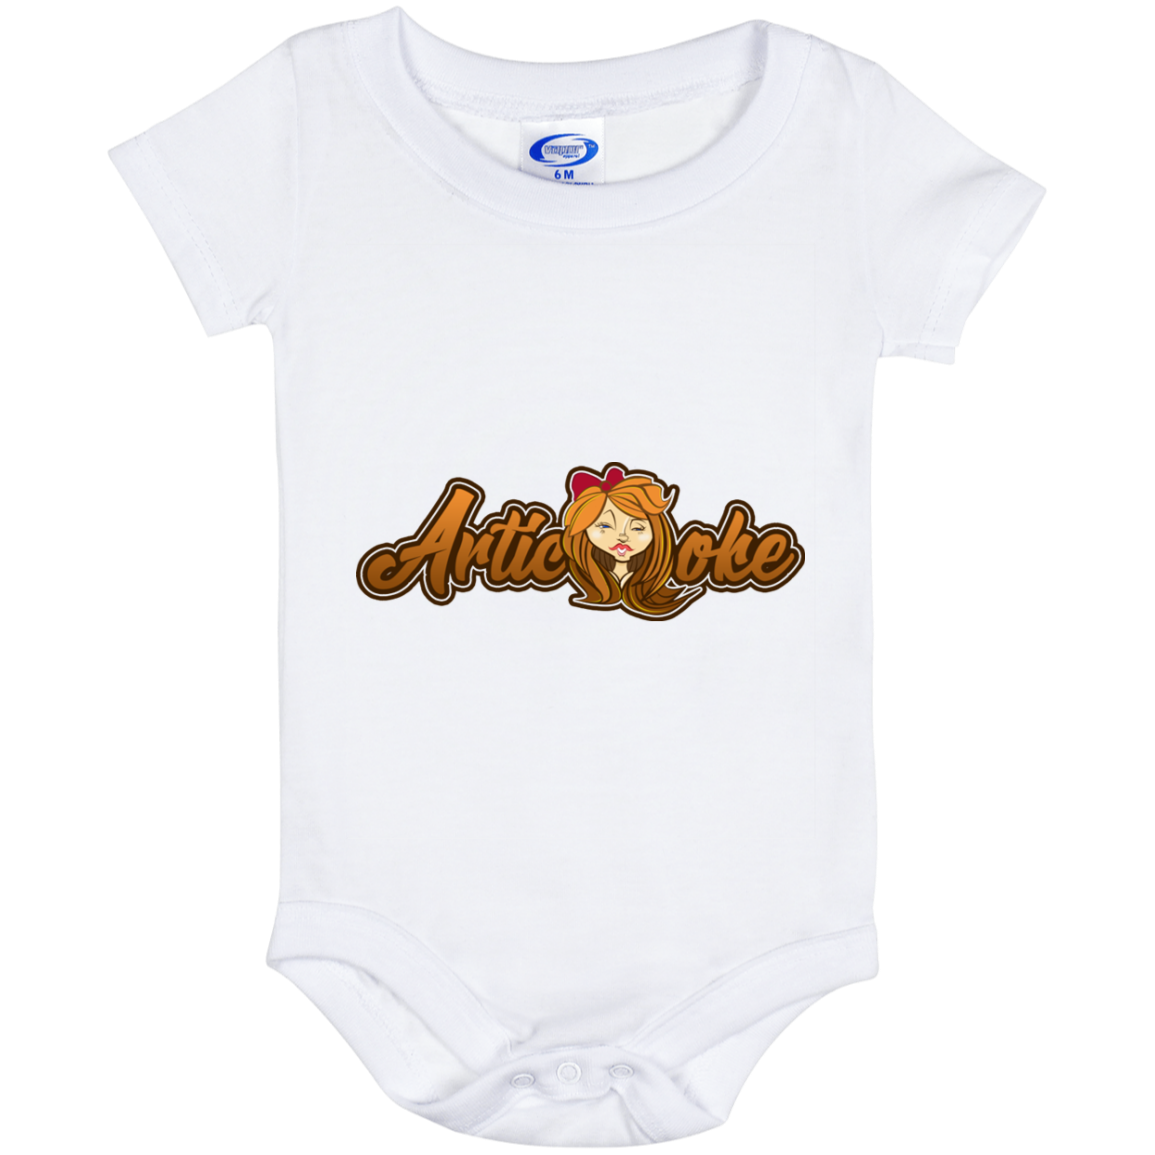 ZZ#21 Characters and Fonts. Aubrey. A show case of my characters and font styles. Baby Onesie 6 Month